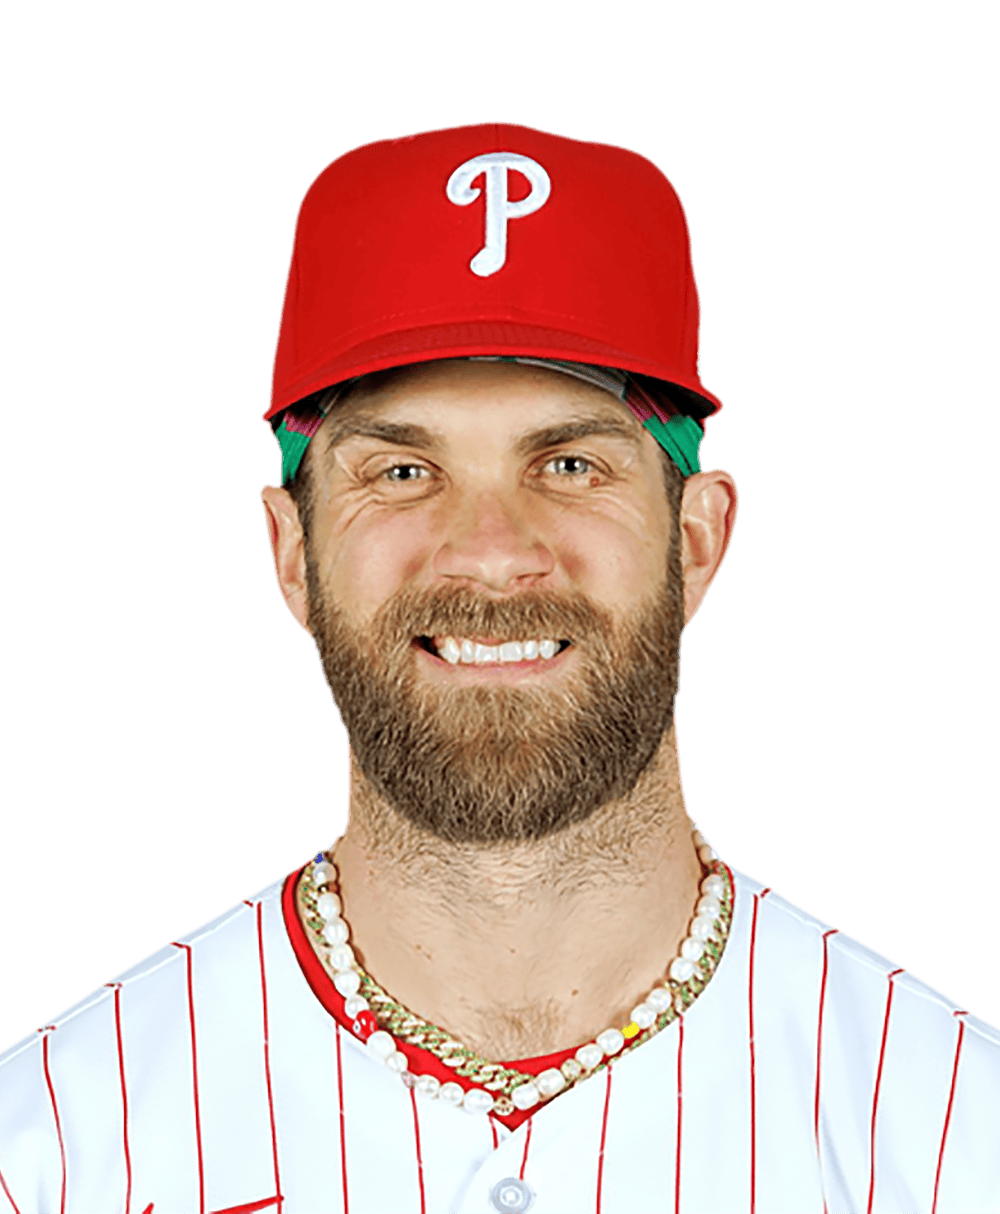 2028 Los Angeles Olympics: Phillies superstar Bryce Harper says it